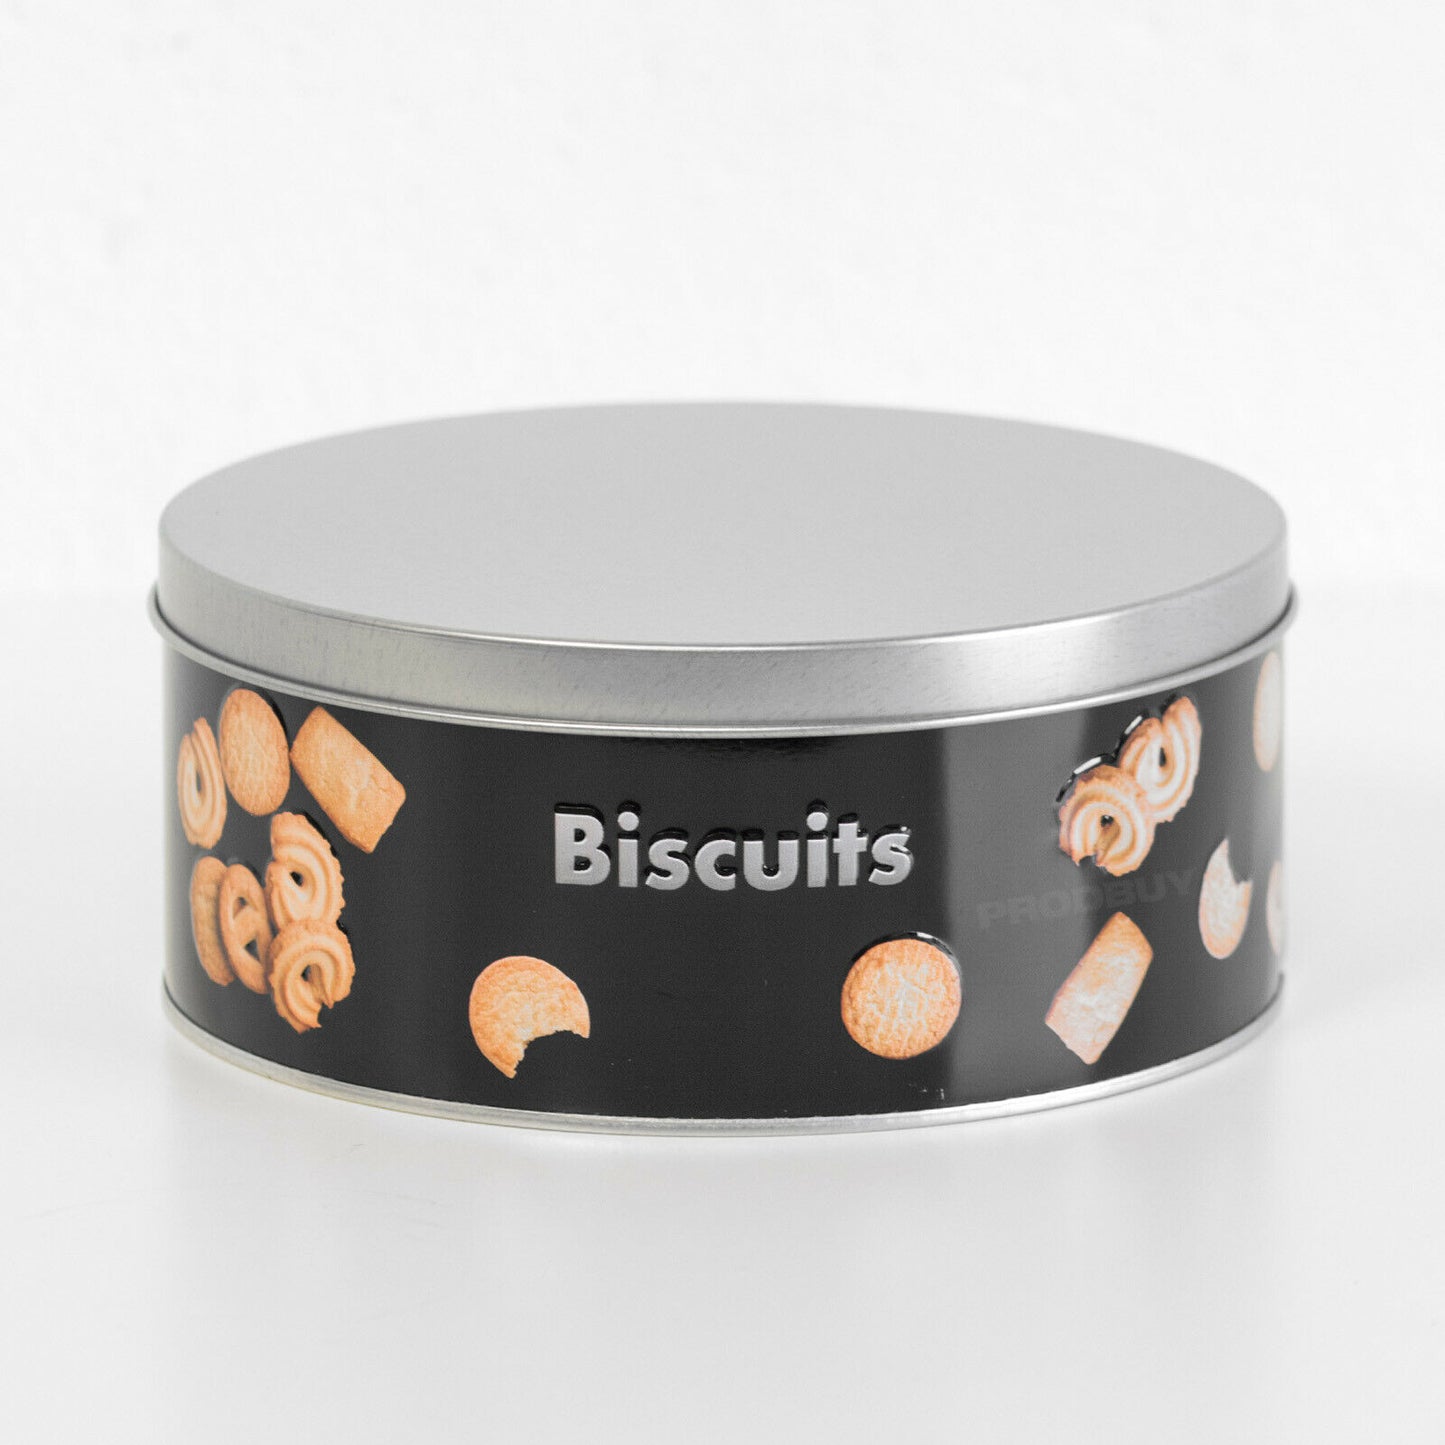 Small Round Black Metal Biscuit Storage Tin with Lid Container Cookie Barrel Jar